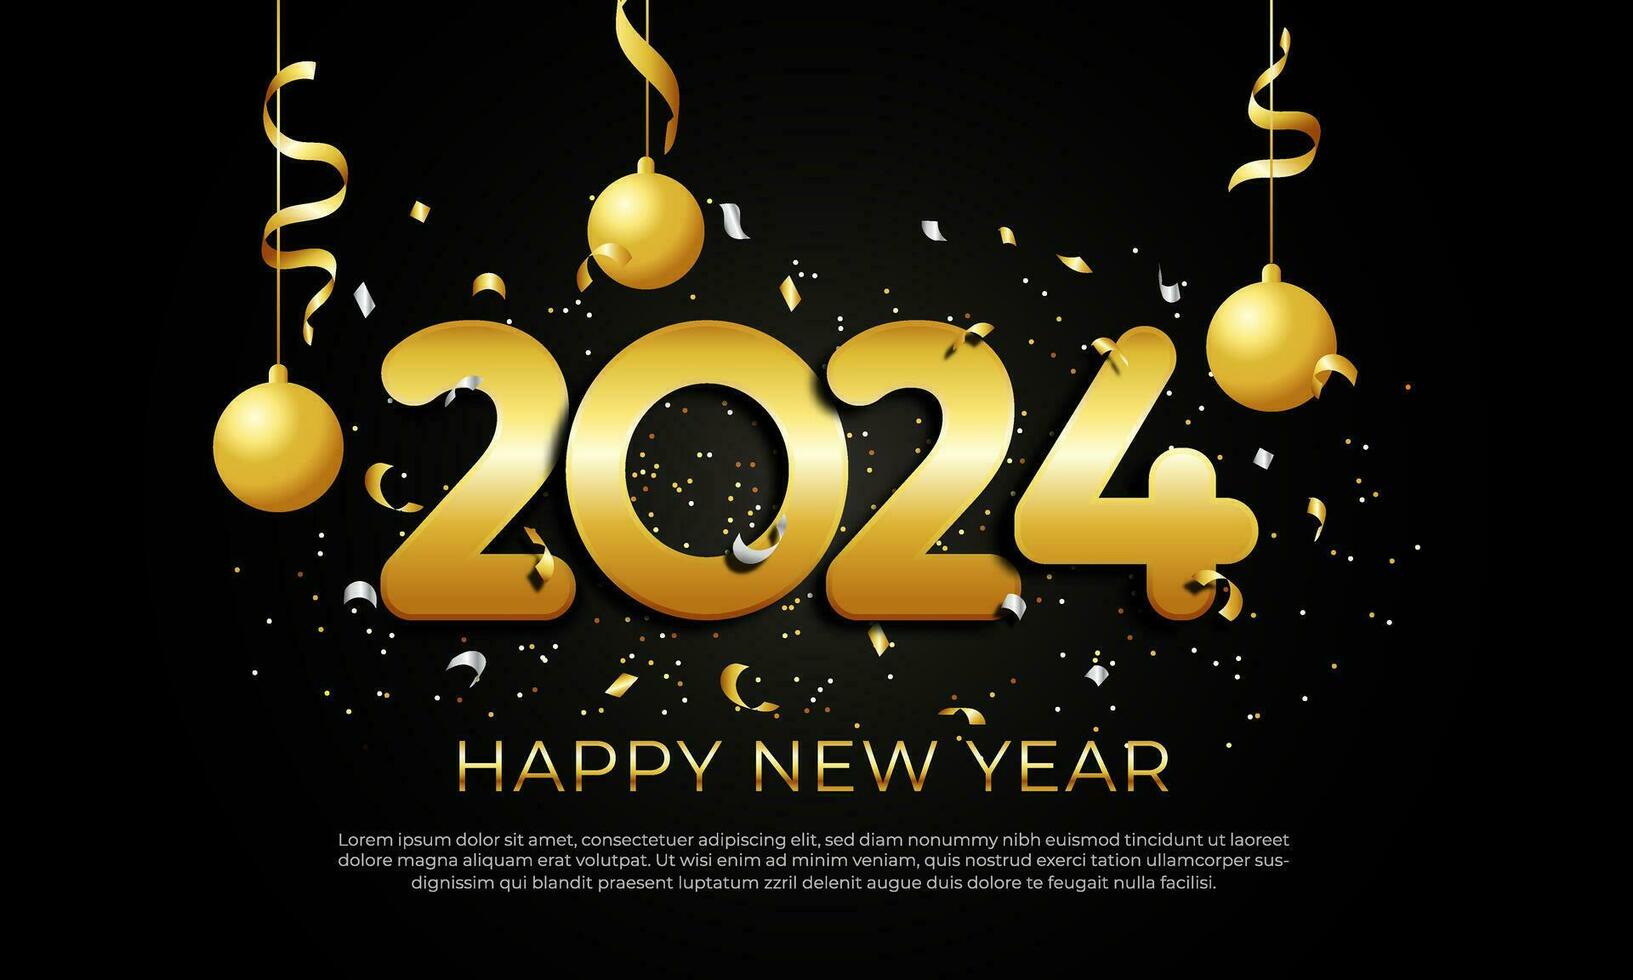 Happy new year 2024 with gold number and confetti design on dark background,suitable for holiday banner,poster design,greeting card design template illustration vector